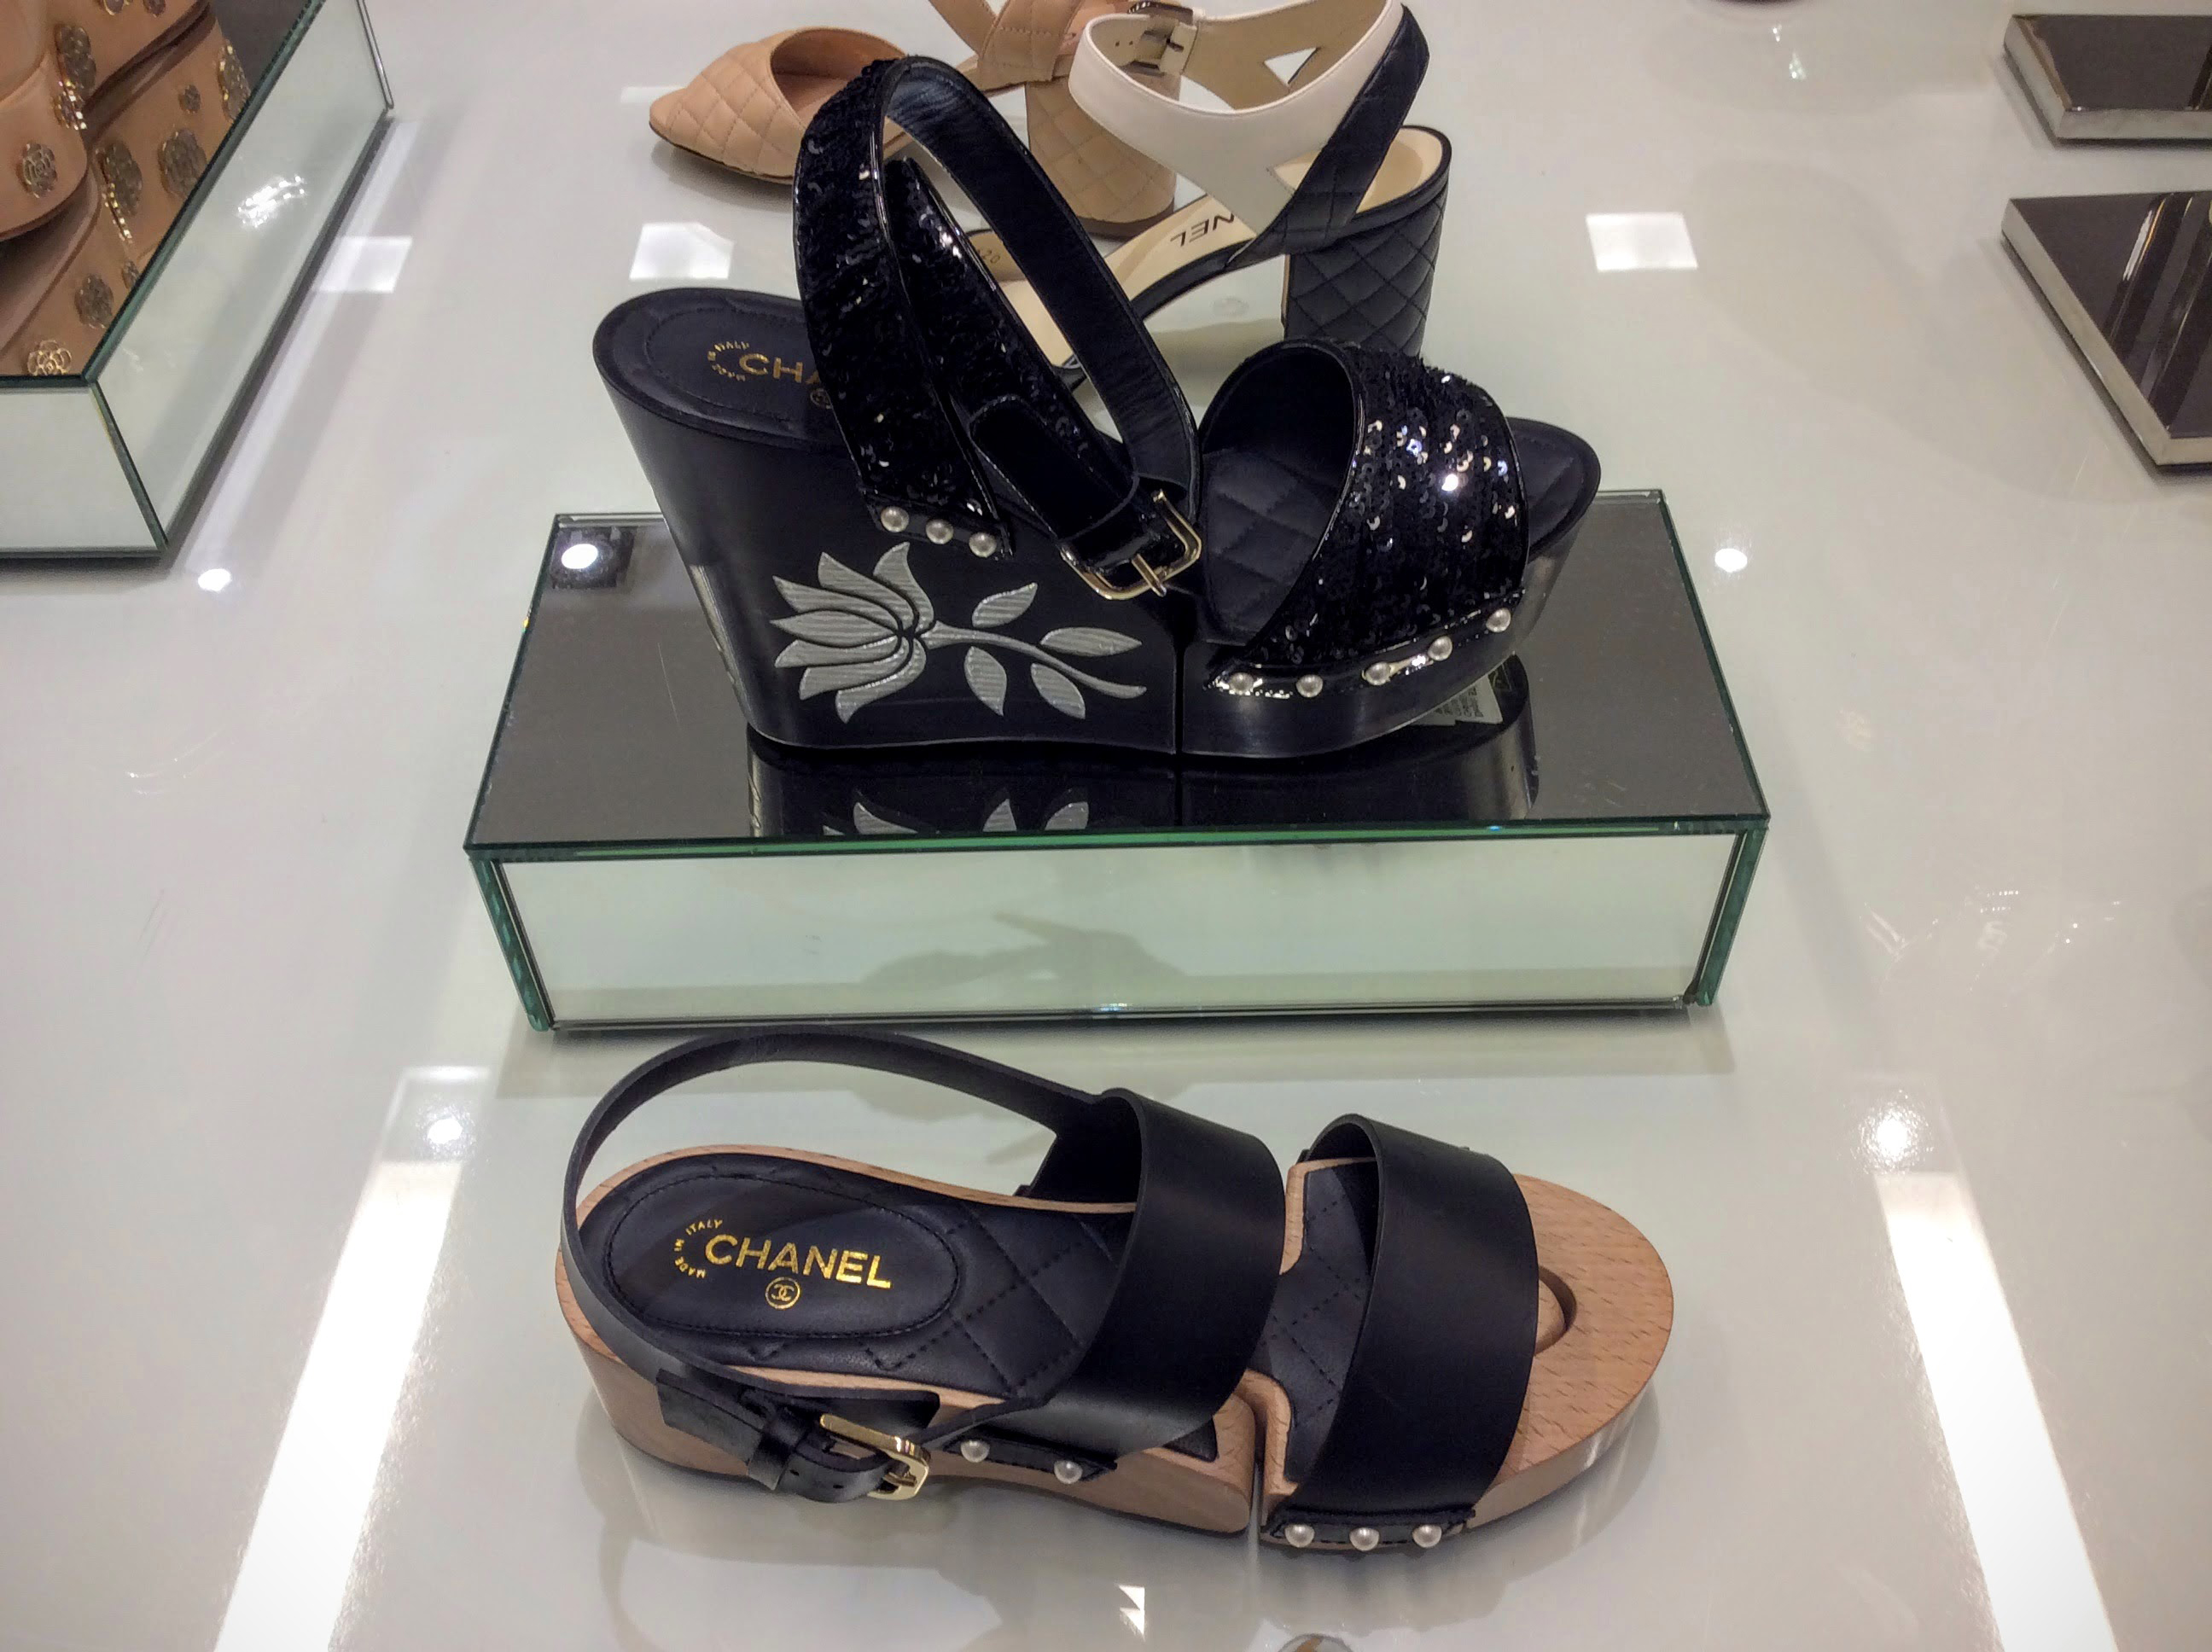 Chanel Shoes  InStore Trends at Bloomingdales  Chanel shoes Shoes  Trending shoes